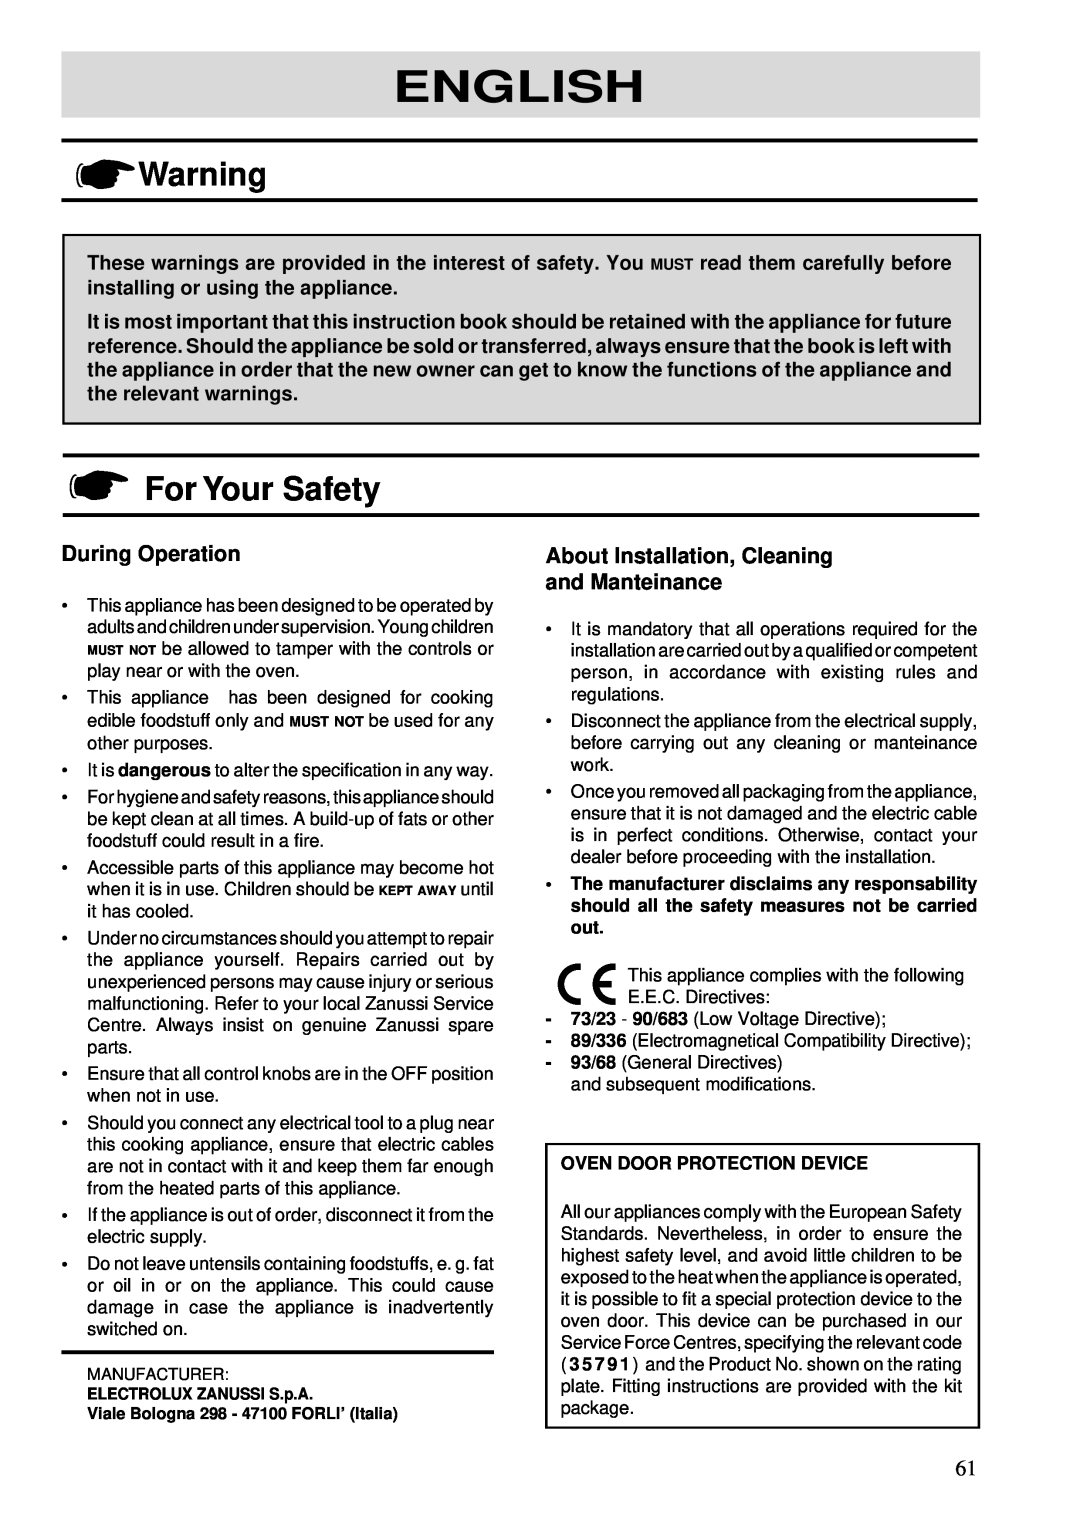 Zanussi ZBS 862 manual For Your Safety, During Operation, About Installation, Cleaning and Manteinance, English 